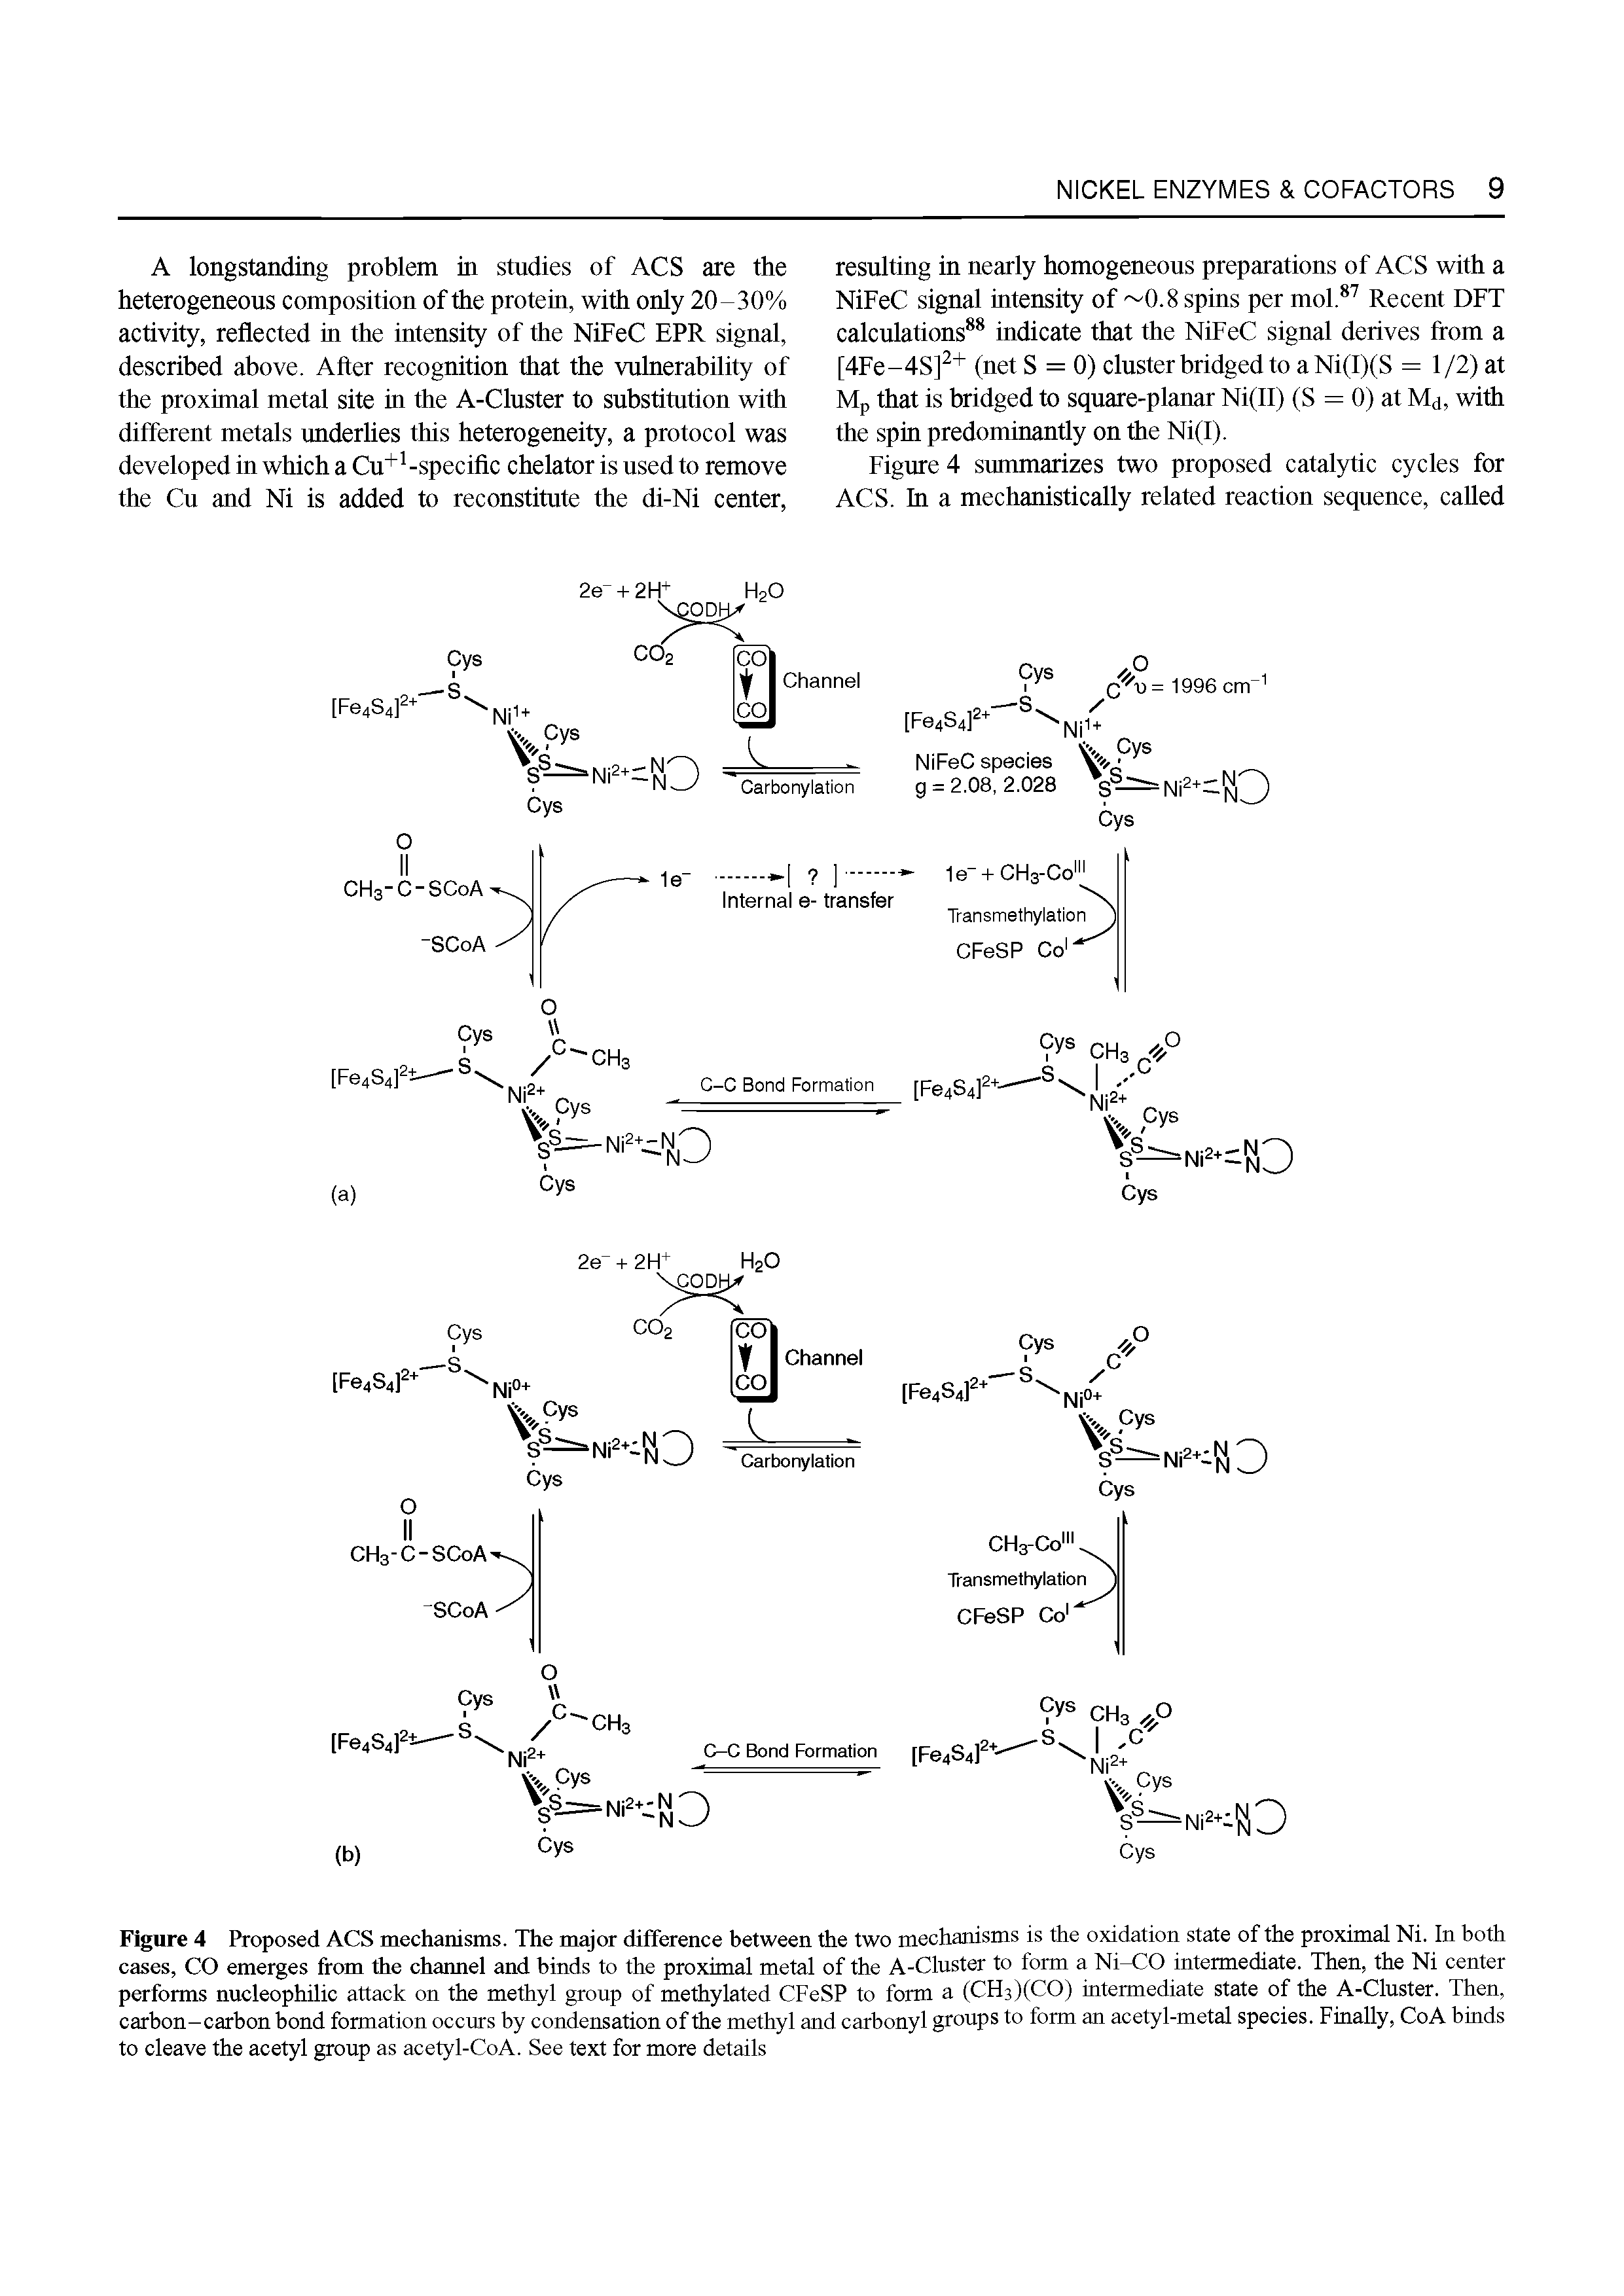 Figure 4 Proposed ACS mechanisms. The major difference between the two mechanisms is the oxidation state of the proximal Ni. In both cases, CO emerges from the channel and binds to the proximal metal of the A-Cluster to form a Ni-CO intermediate. Then, the Ni center performs nucleophilic attack on the methyl group of methylated CFeSP to form a (CH3)(CO) intermediate state of the A-Cluster. Then, carbon-carbon bond formation occurs by condensation of the methyl and carbonyl groups to form an acetyl-metal species. Finally, CoA binds to cleave the acetyl group as acetyl-CoA. See text for more details...